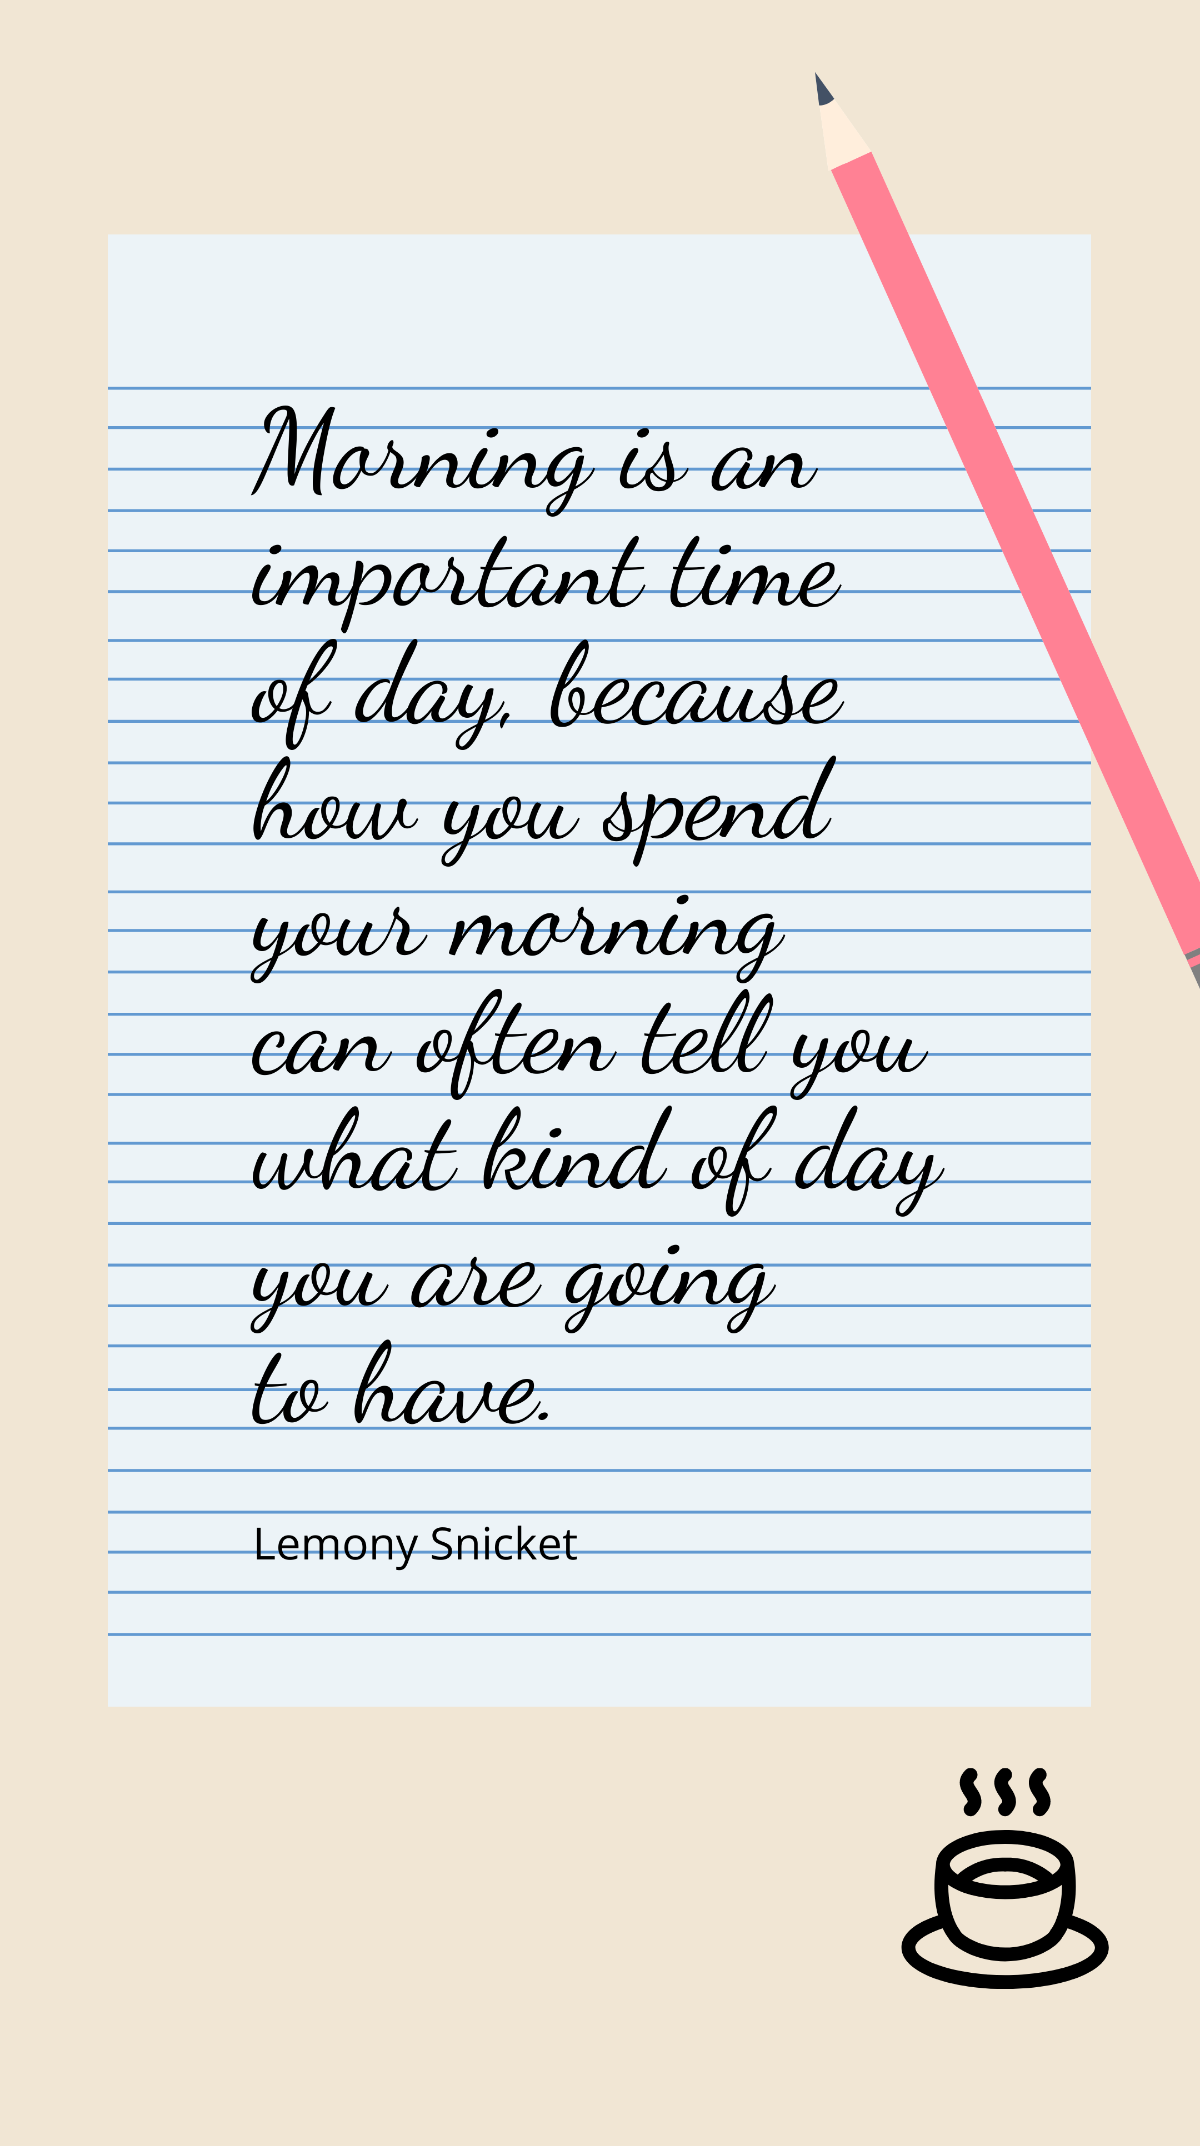 Lemony Snicket - Morning is an important time of day, because how you spend your morning can often tell you what kind of day you are going to have. Template